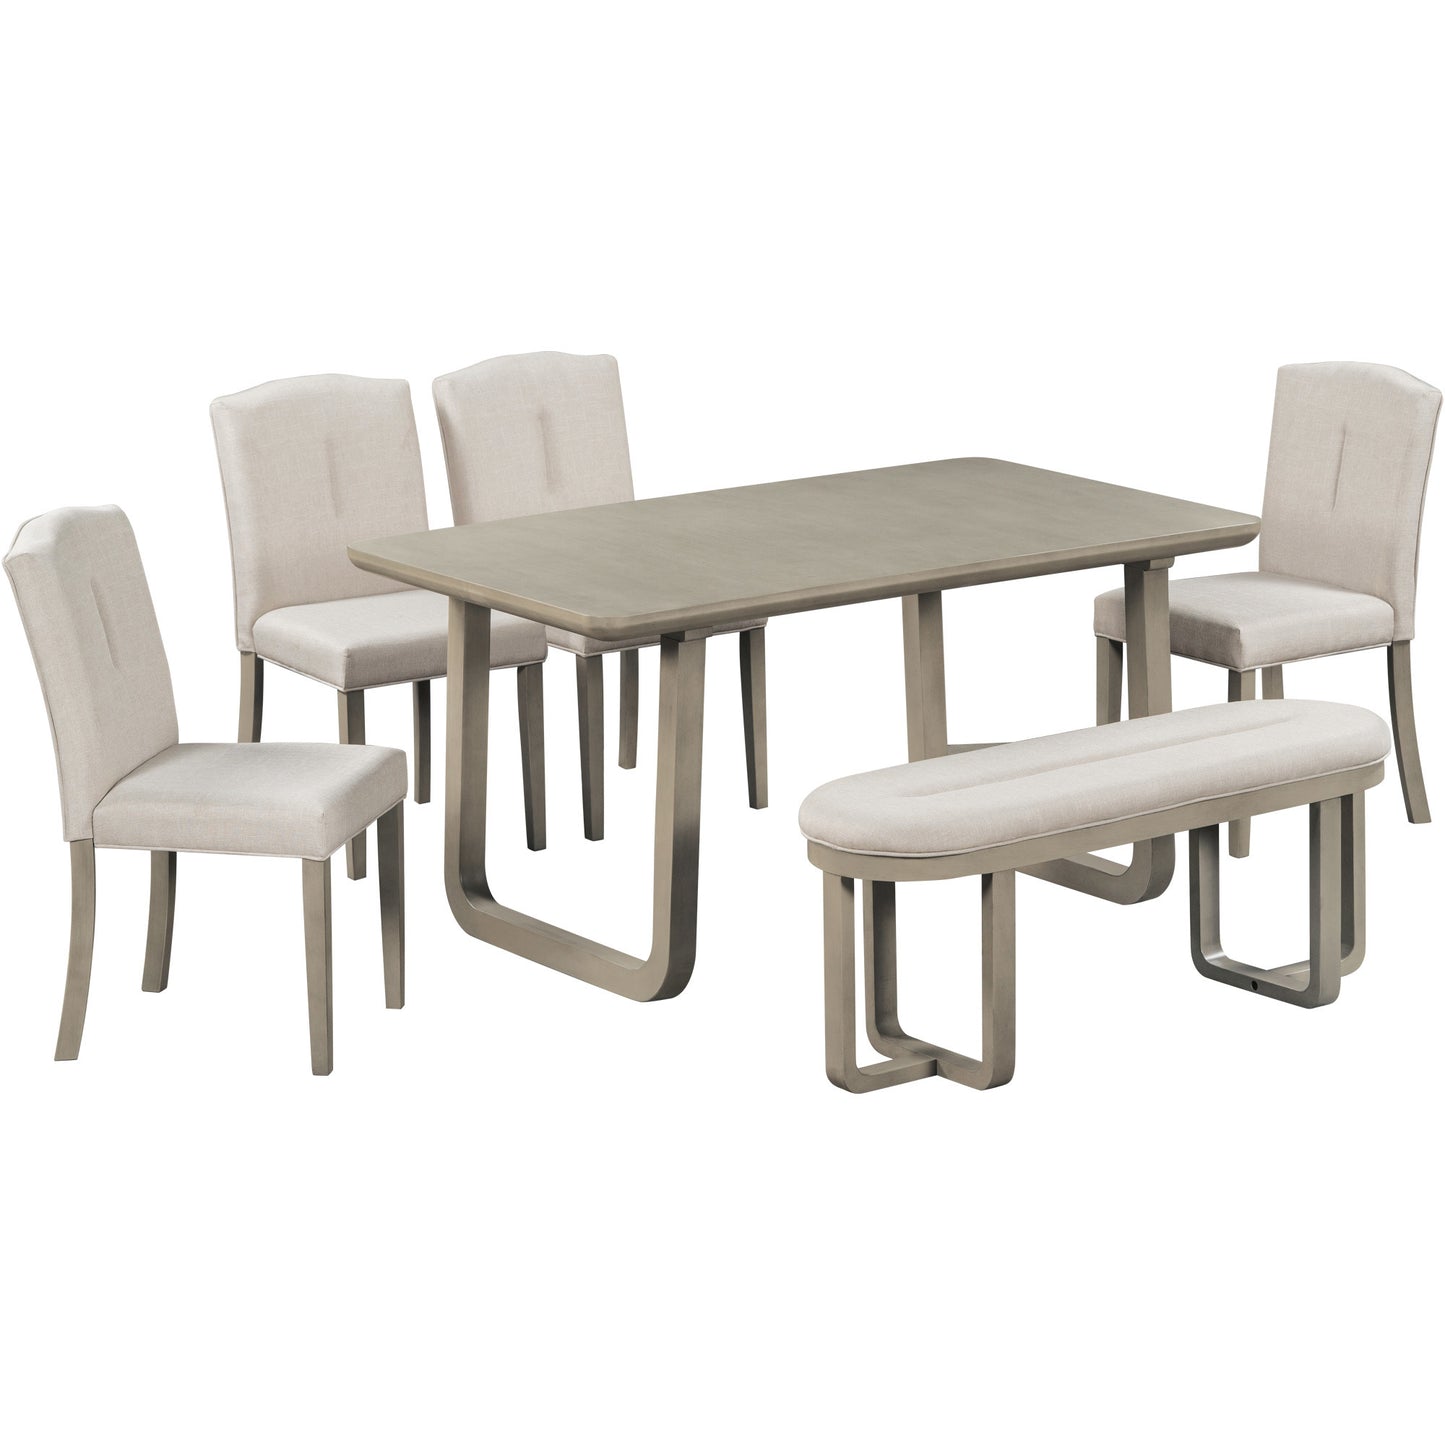 6-Piece Retro-Style Dining Set Includes Dining Table, 4 Upholstered Chairs & Bench with Foam-covered Seat Backs & Cushions for Dining Room (Light Khaki+Beige)